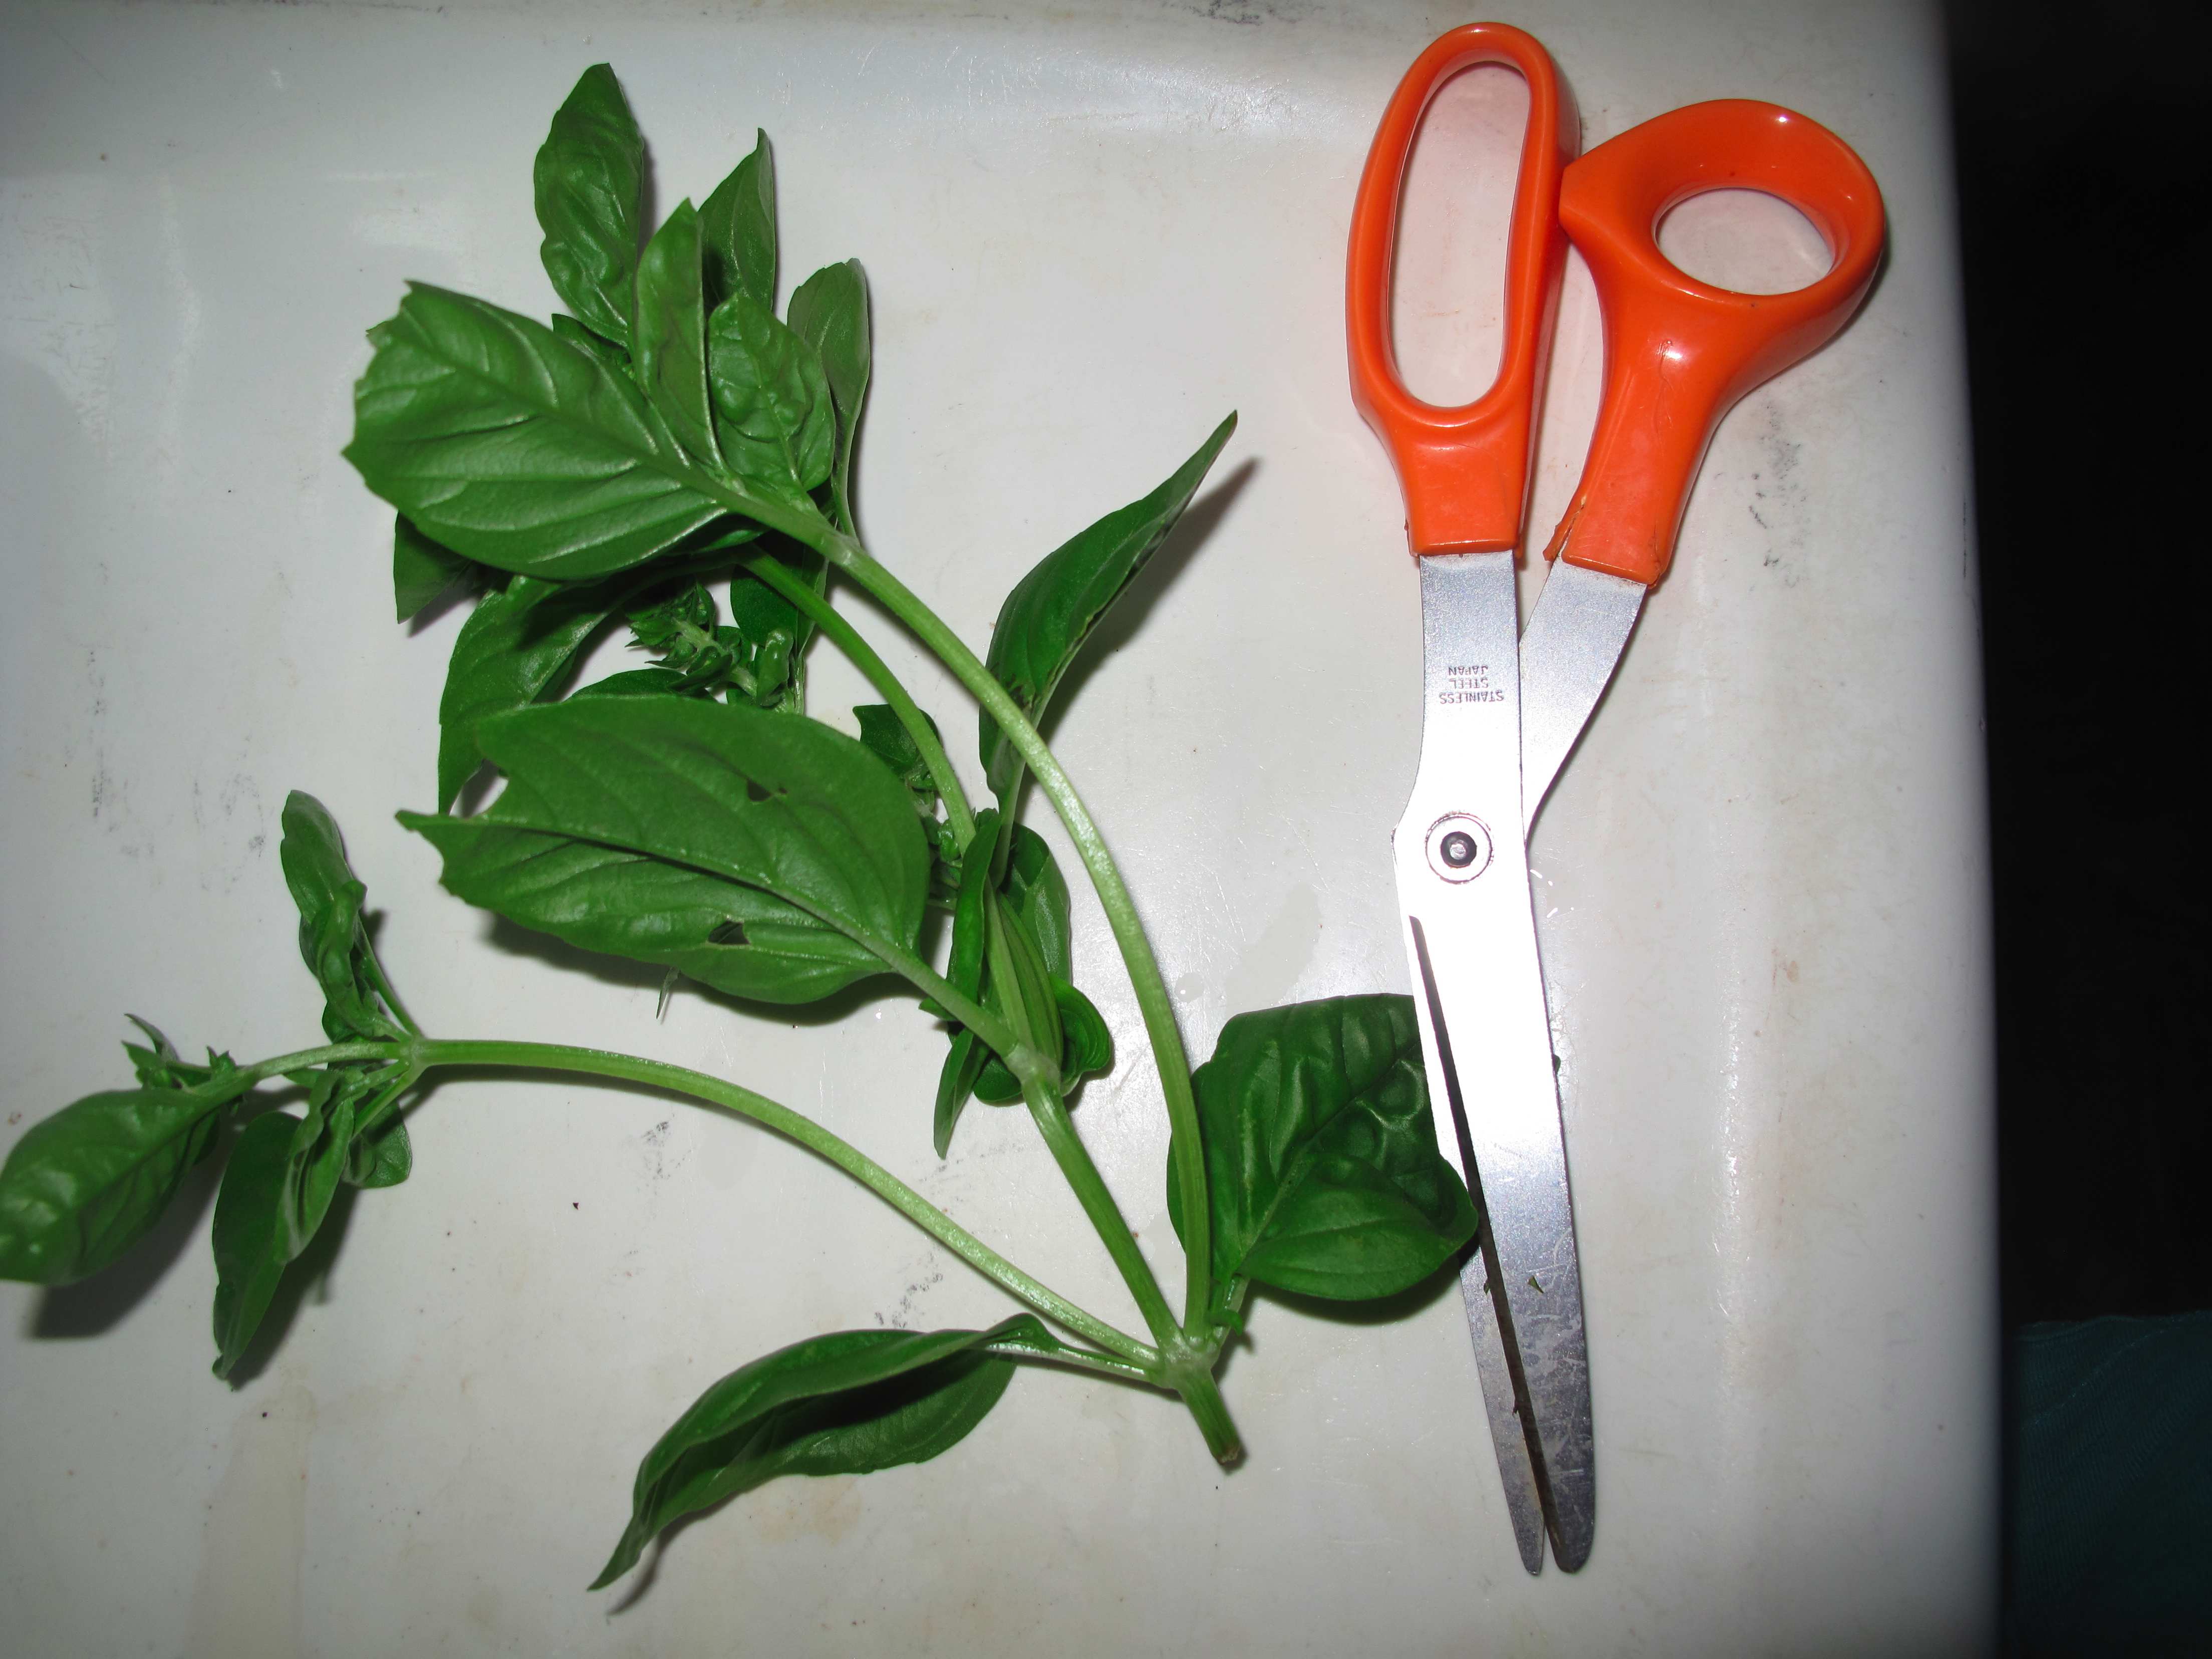 What are some tips for pruning basil?